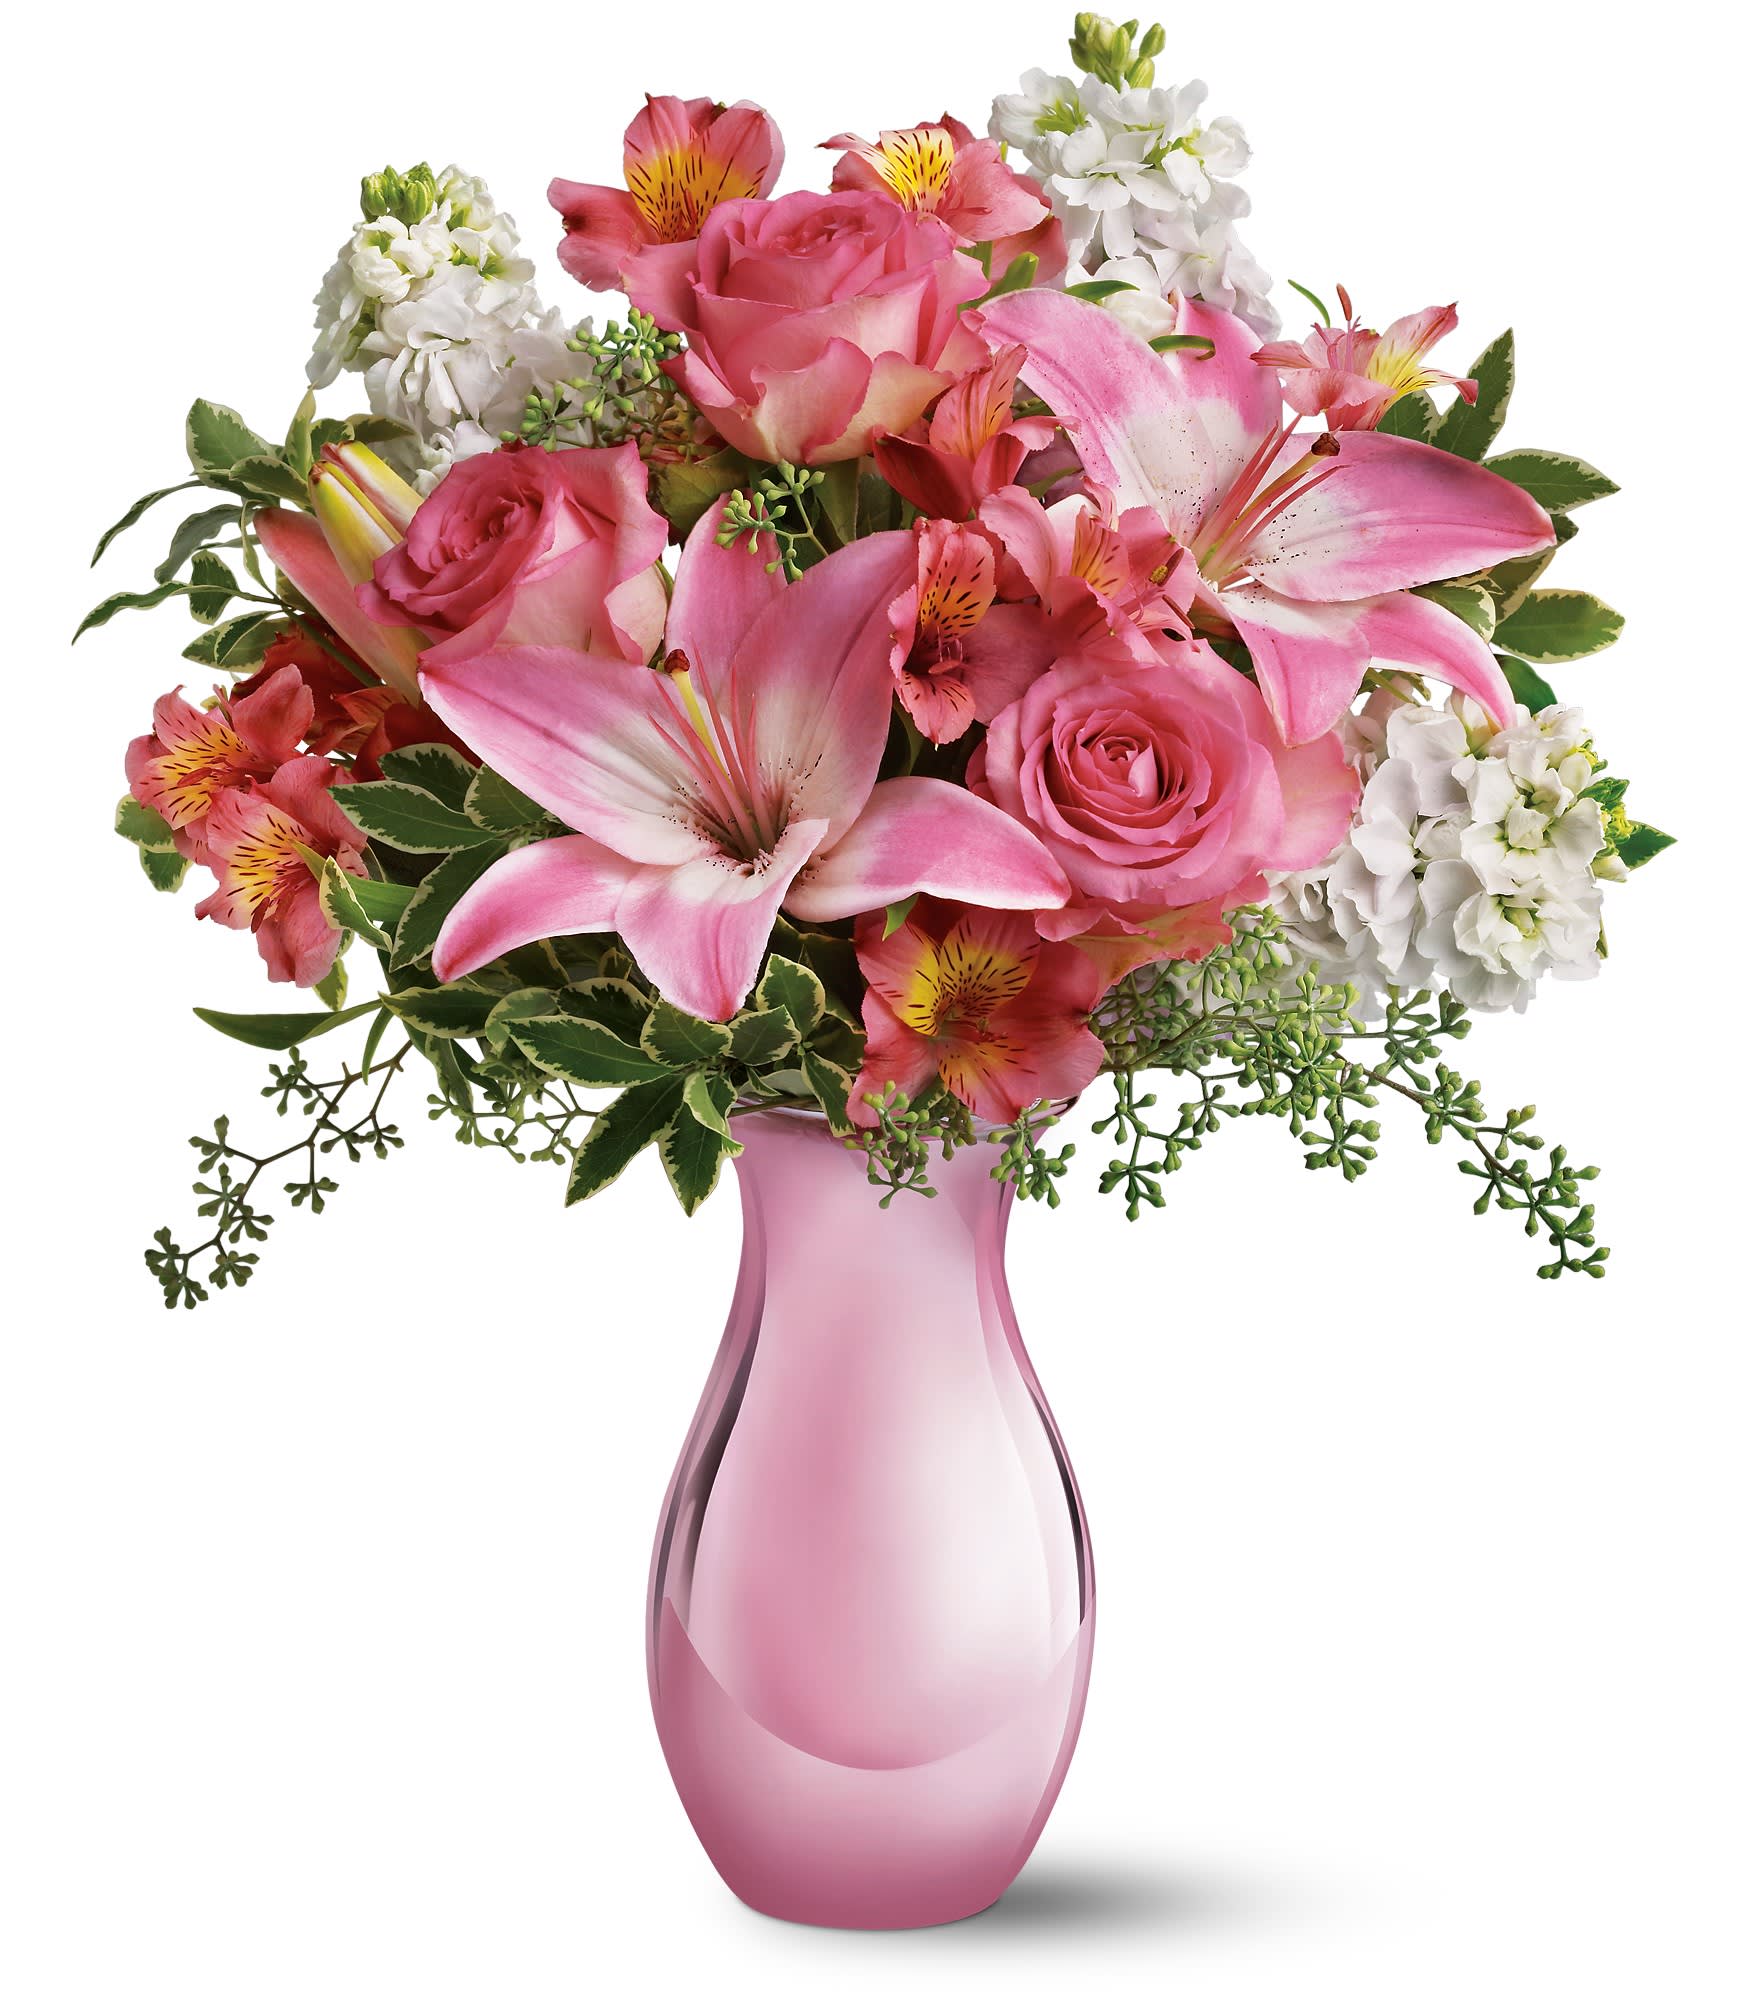 Teleflora's Pink Reflections Bouquet with Roses - Oh, so pretty in pink, this beautiful bouquet will make any woman's day. With so many pretty flowers in such a uniquely beautiful vase, this can't-miss gift is perfect for Mother's Day, a birthday, any day! 